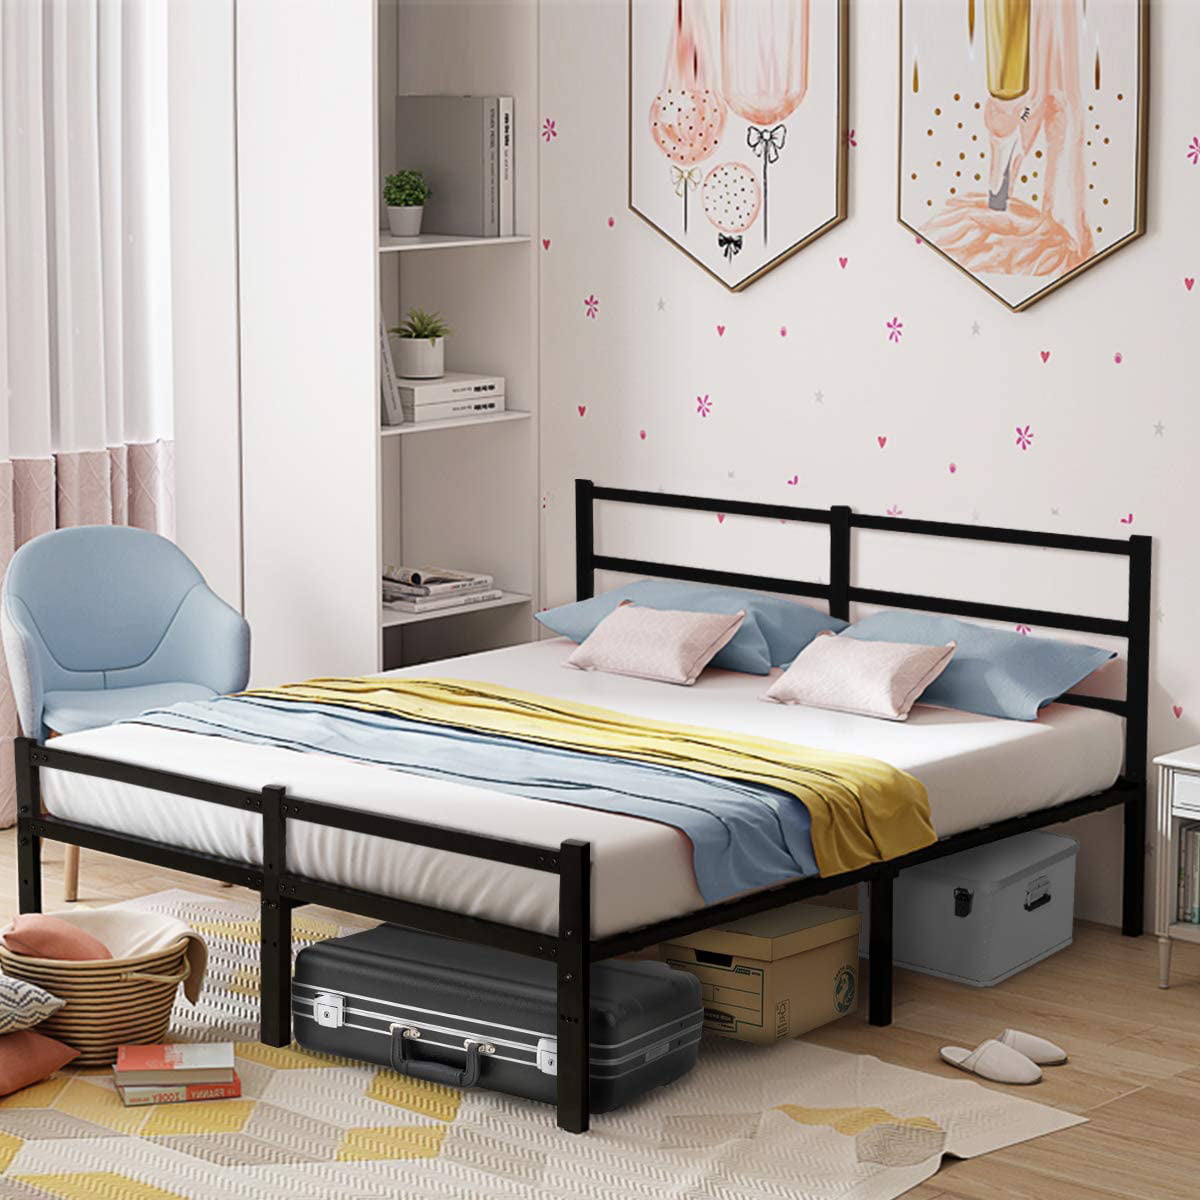 Queen Bed Frames With Headboard Black, Queen Platform Bed Frame With Storage No Headboard